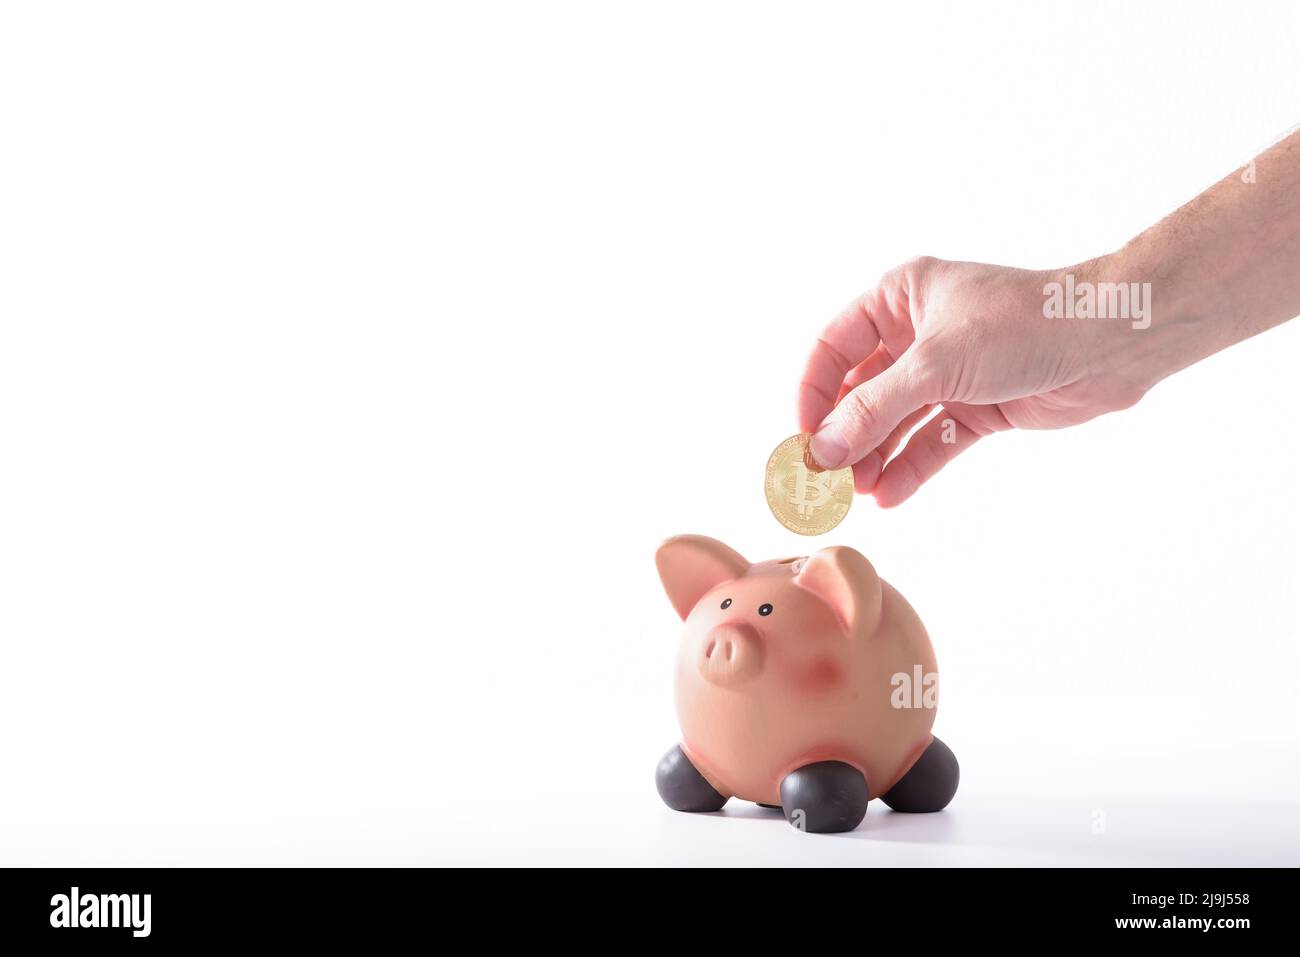 Piggy bank full of money. Coins and dollar bills. A symbol of accumulation and well-being. Purchase planning. Financial literacy. Stock Photo